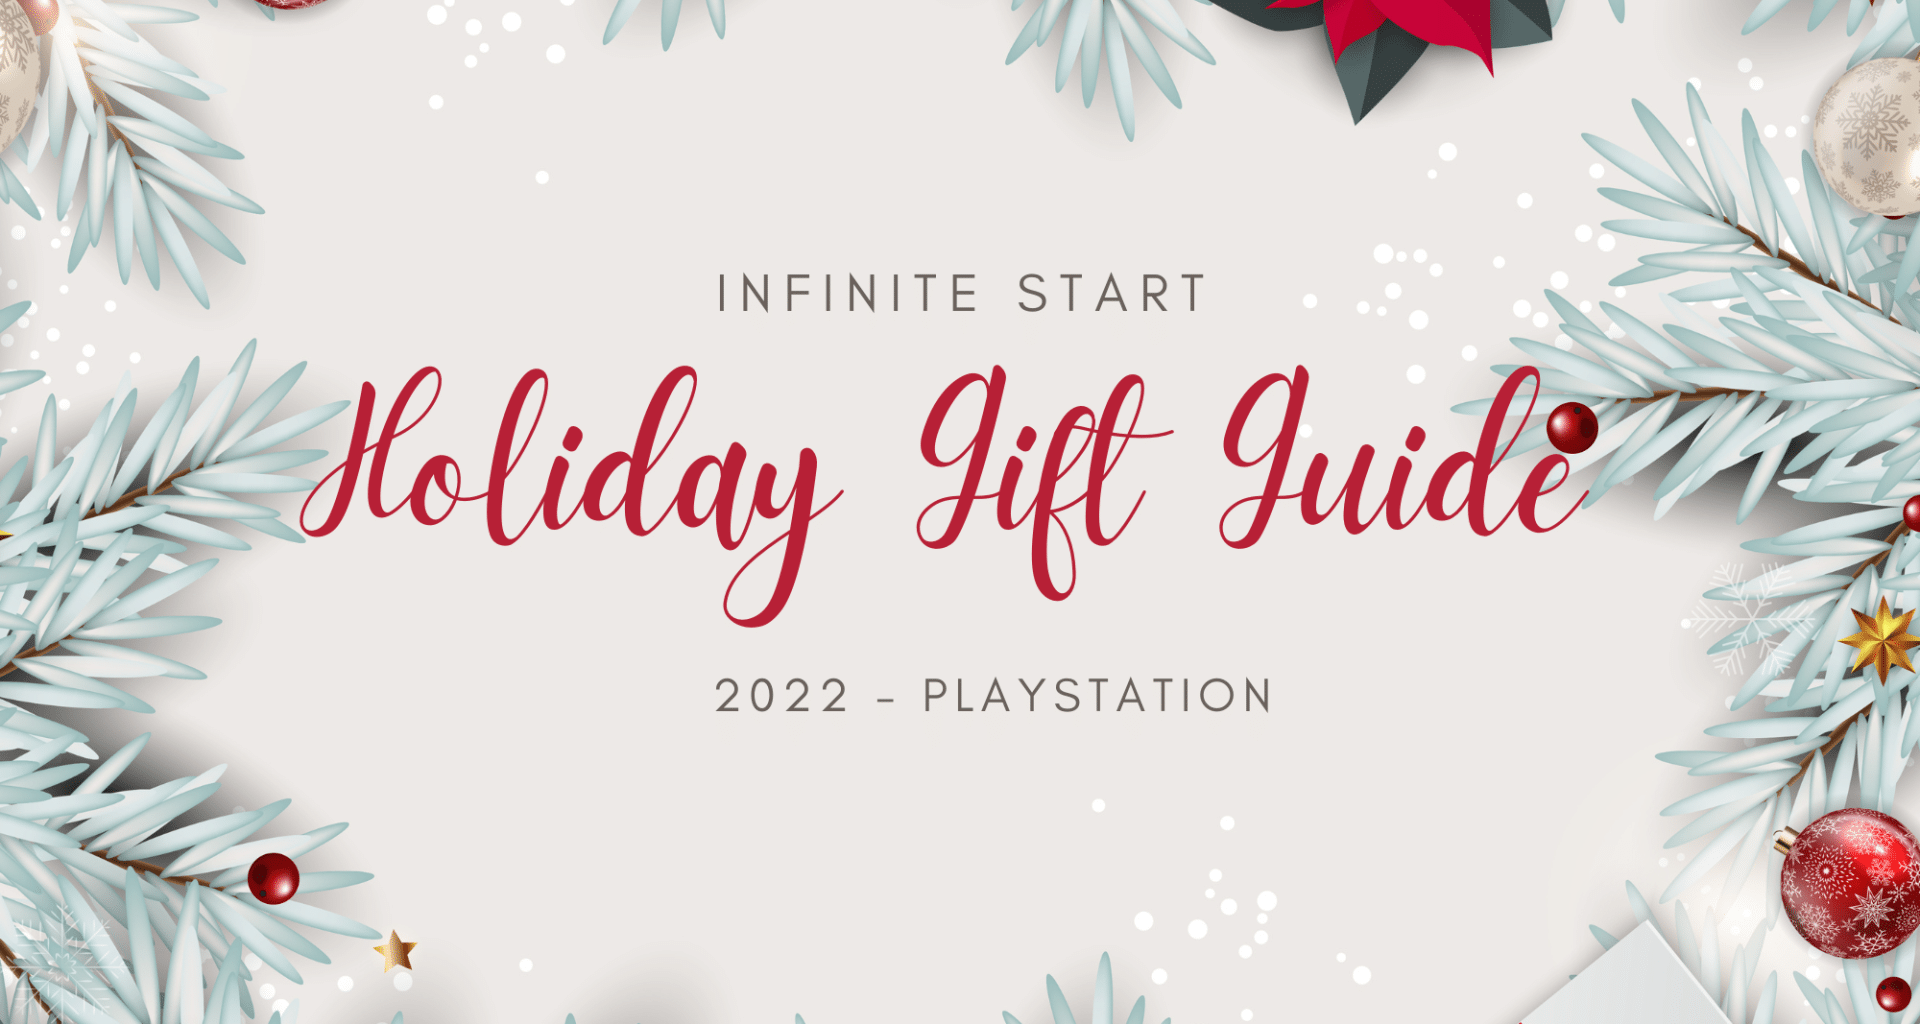 Holiday Gift Guide 2022 – PlayStation